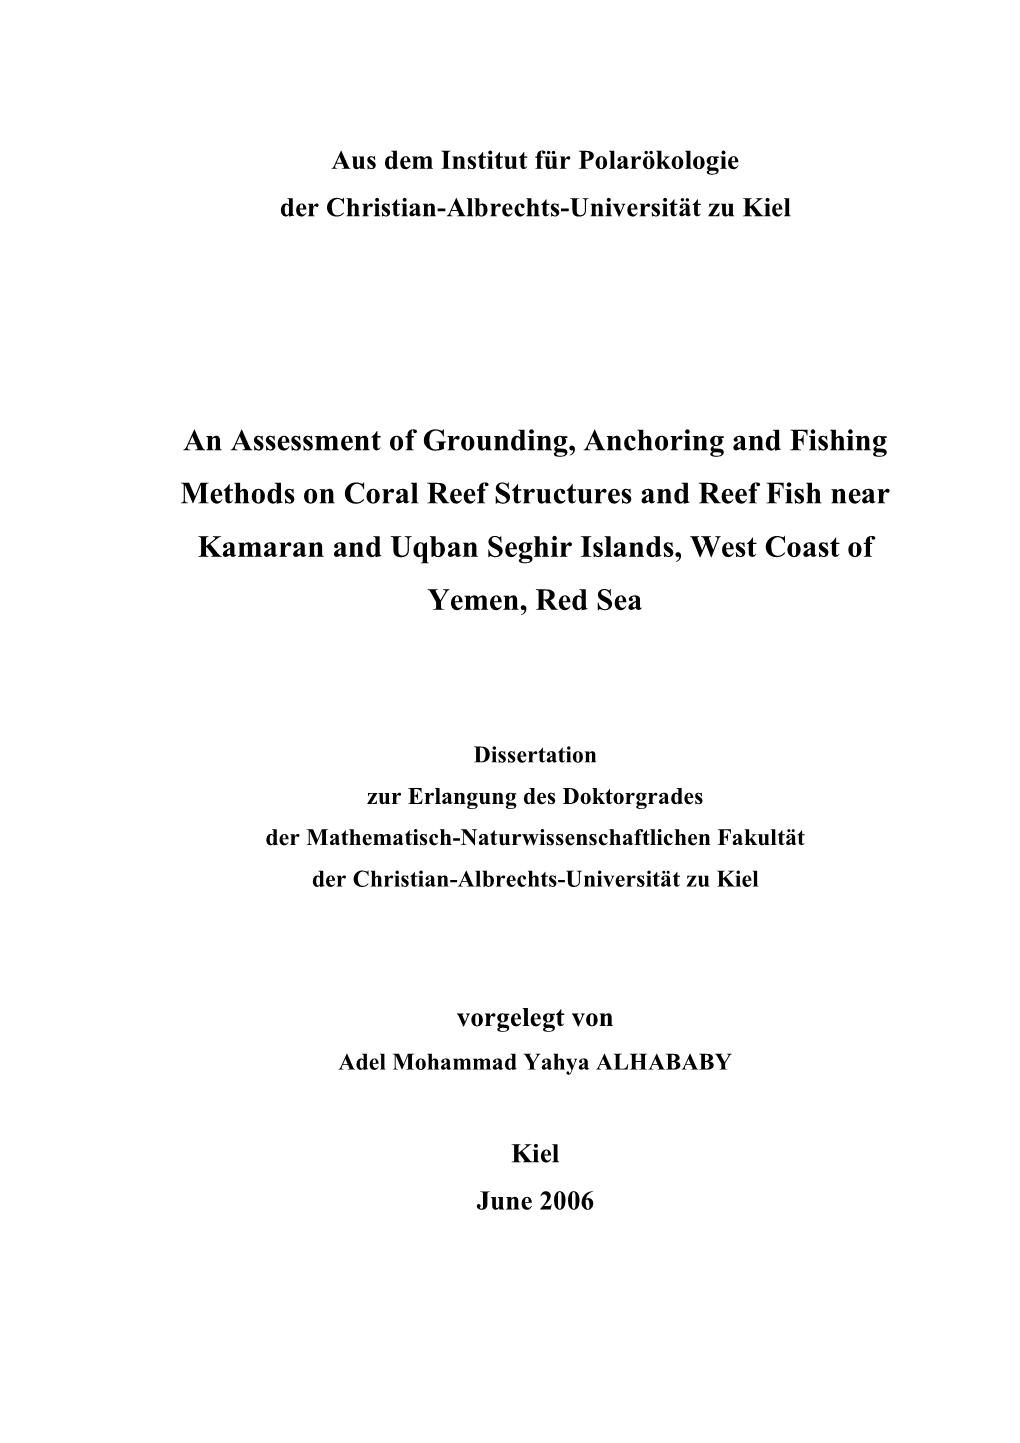 An Assessment of Grounding, Anchoring and Fishing Methods on Coral Reef Structures and Reef Fish Near Kamaran and Uqban Seghir Islands, West Coast of Yemen, Red Sea